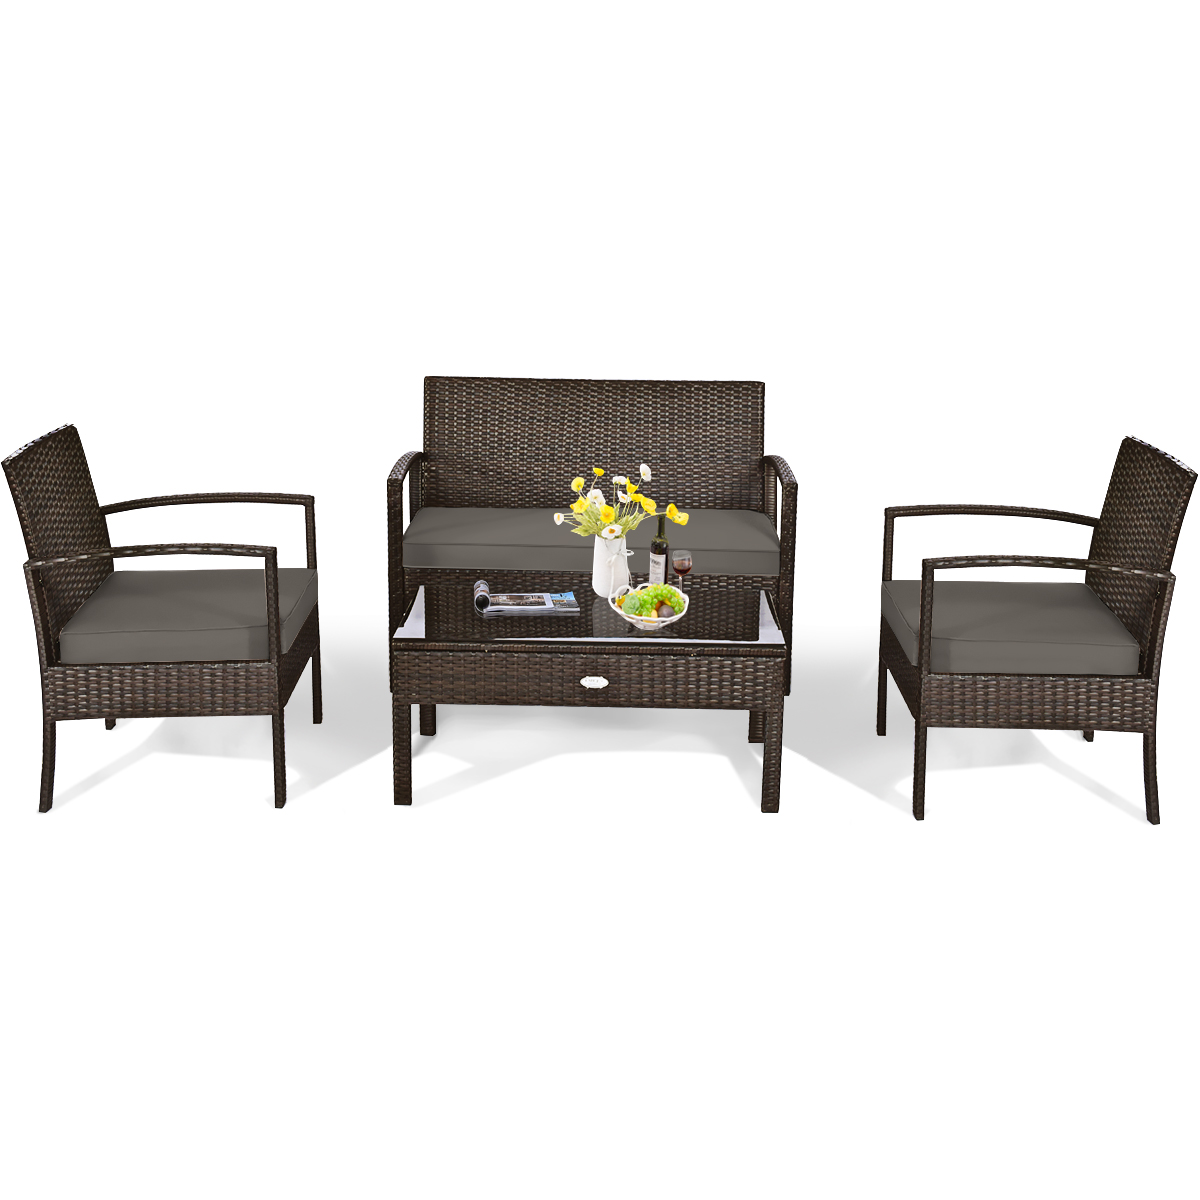 Patiojoy 4 Pieces Outdoor Patio Rattan Furniture Wicker Conversation Set Cushioned - image 4 of 5